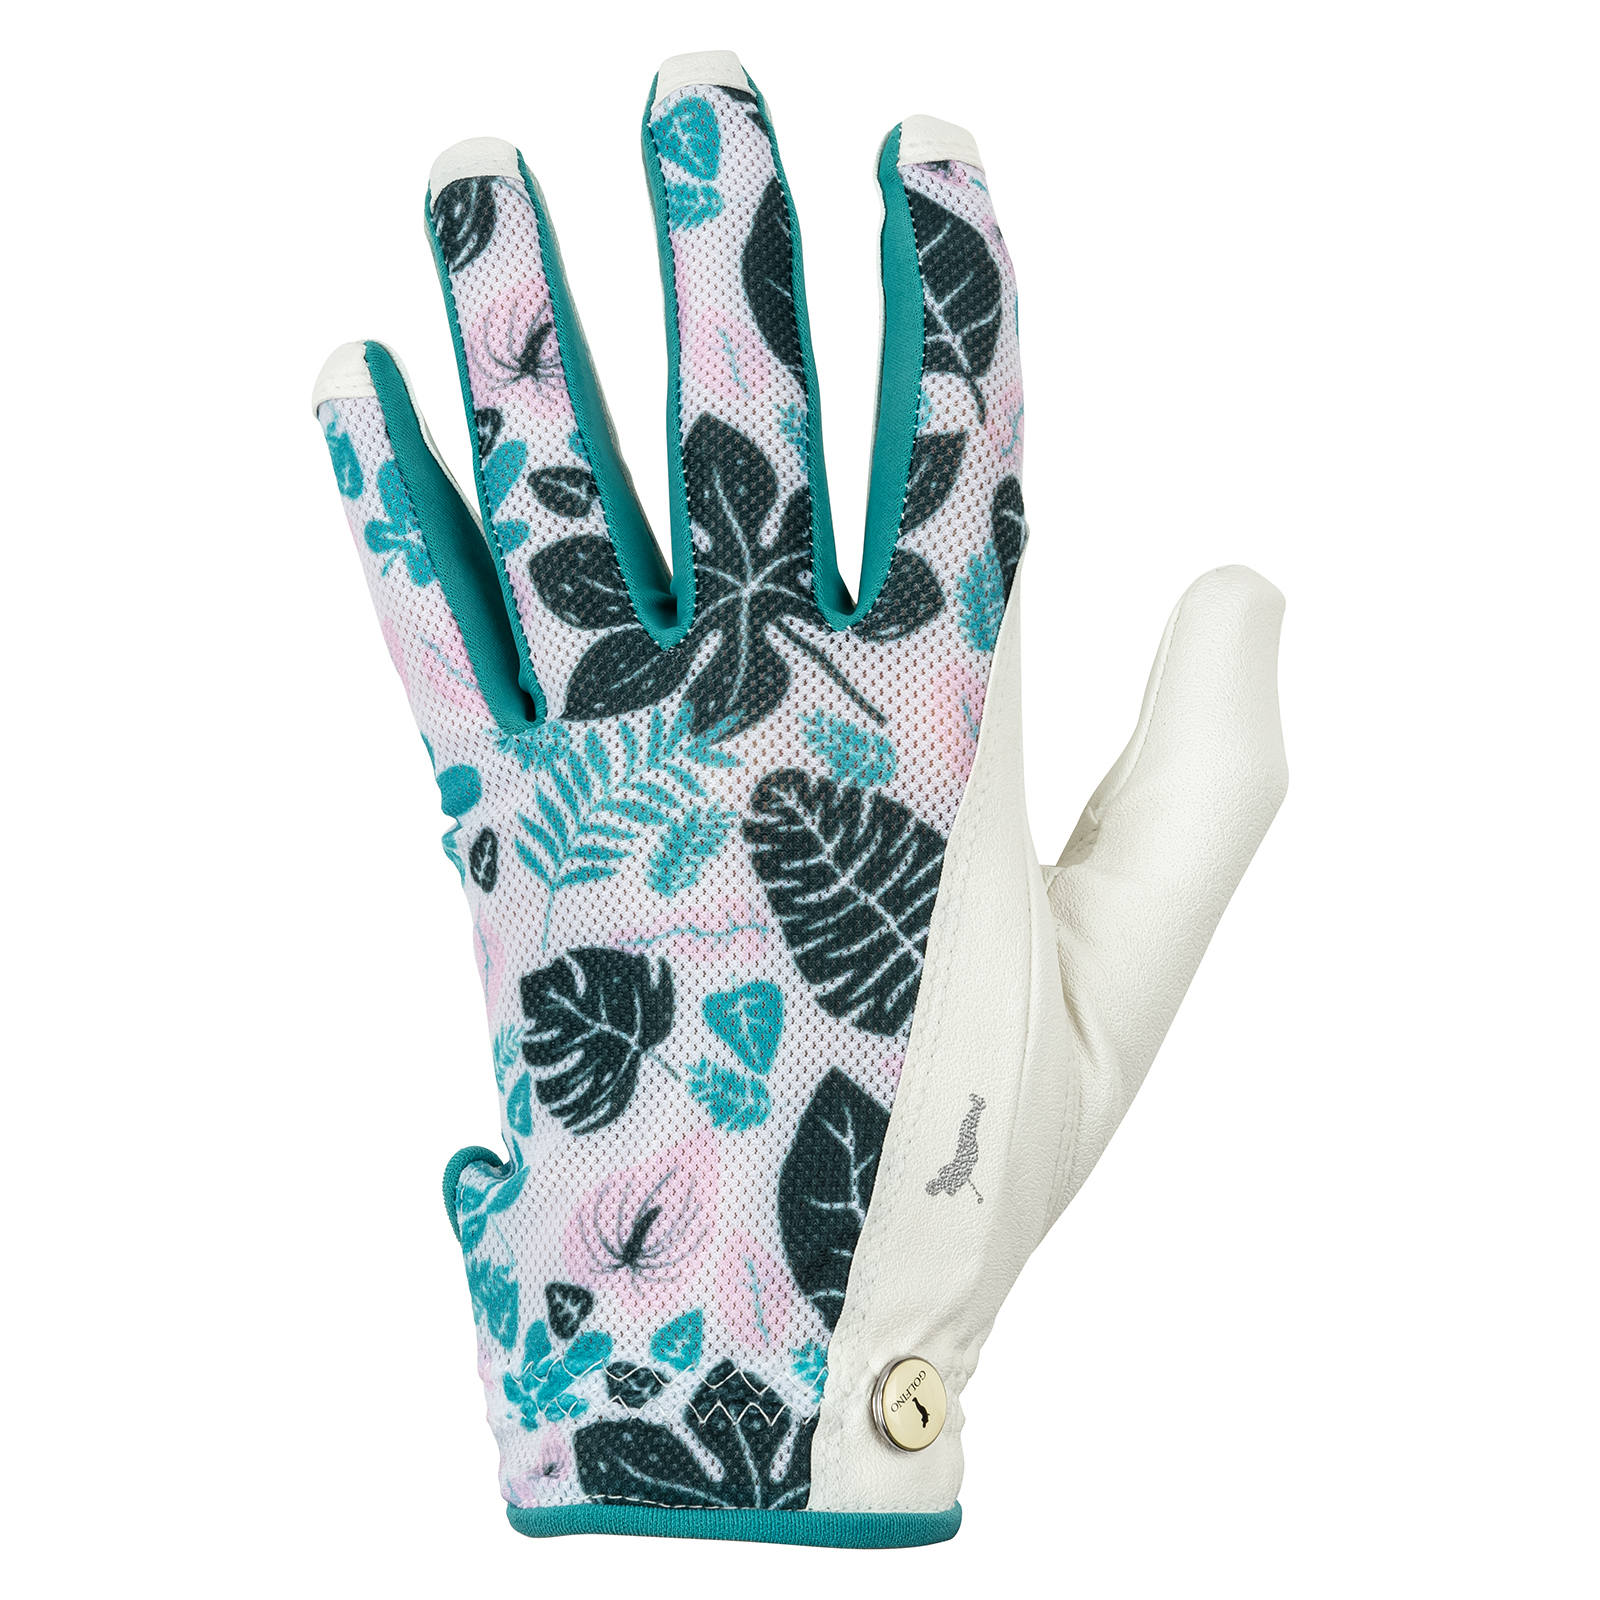 Durable and comfortable ladies' glove 